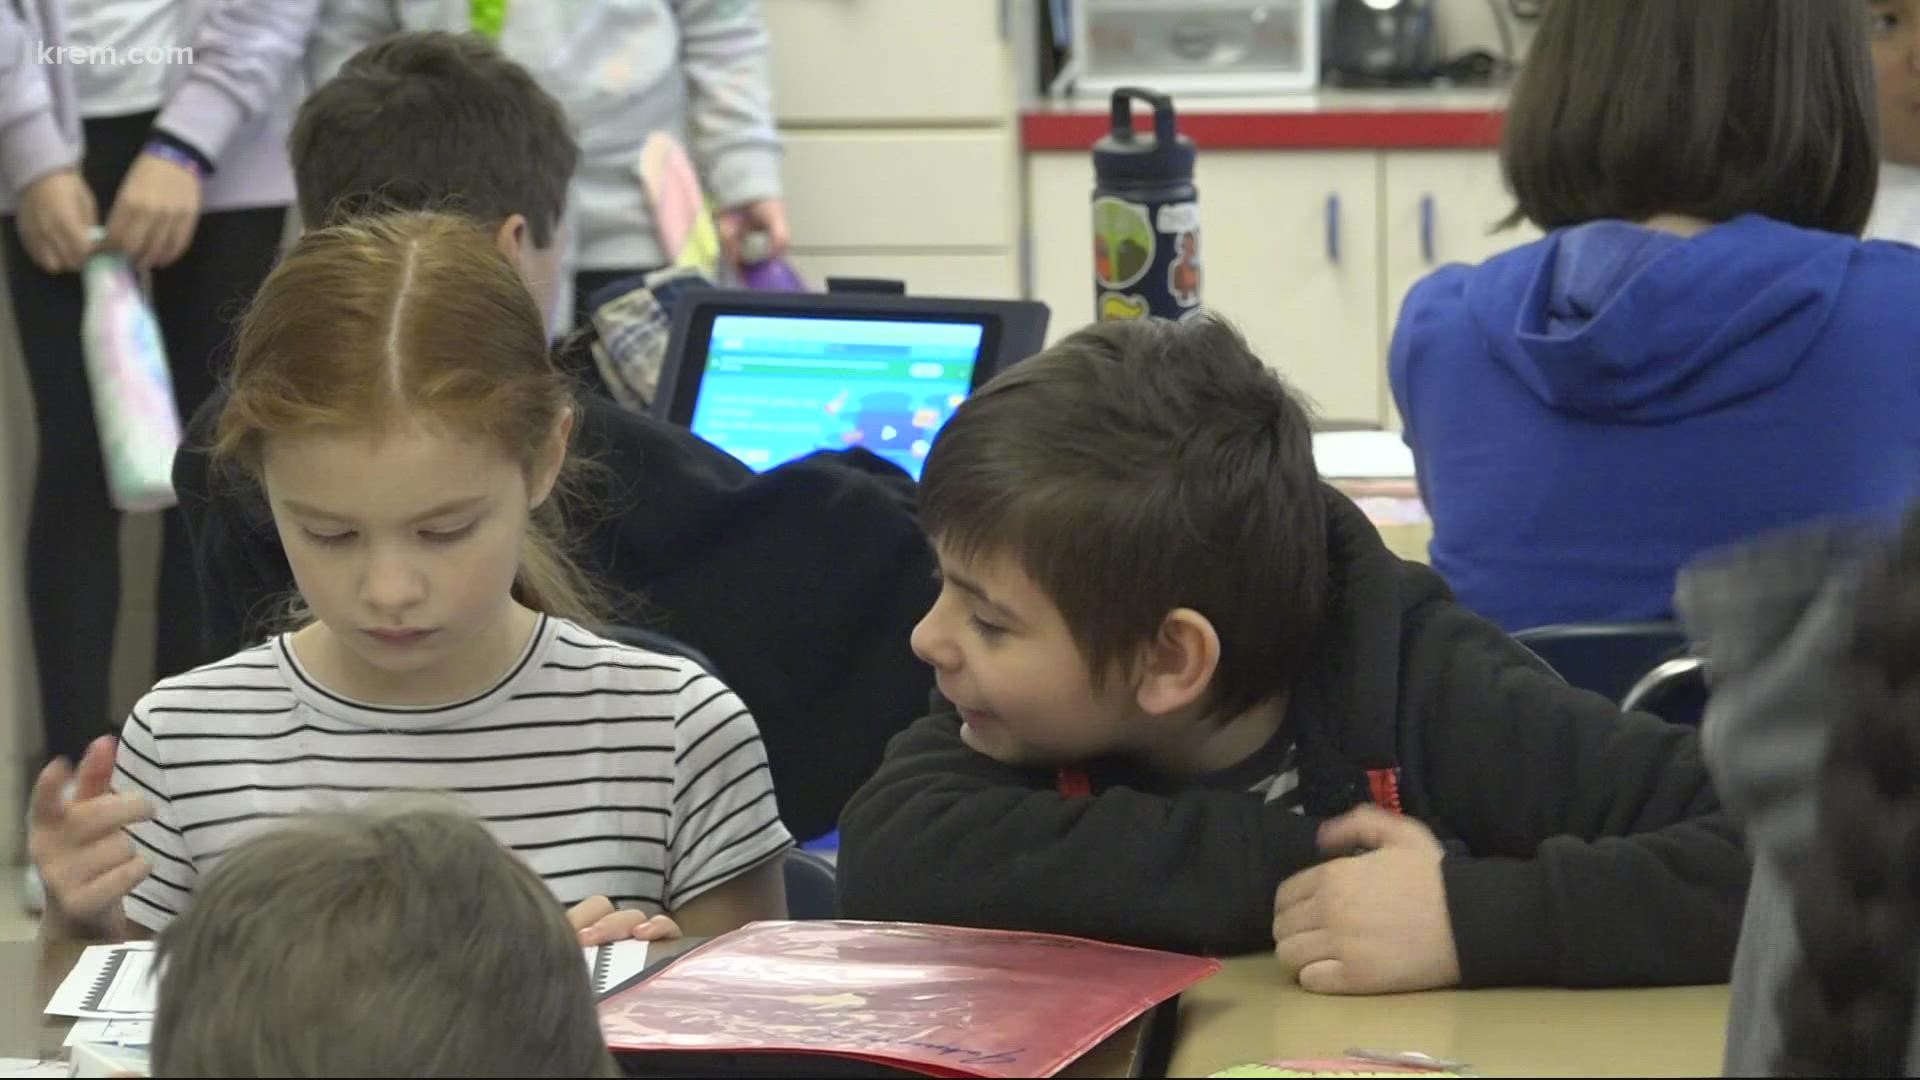 Students were able to walk into their classrooms at Trent Elementary without a mask Monday. Teachers reminded classrooms to be respectful of everyone's mask choices.